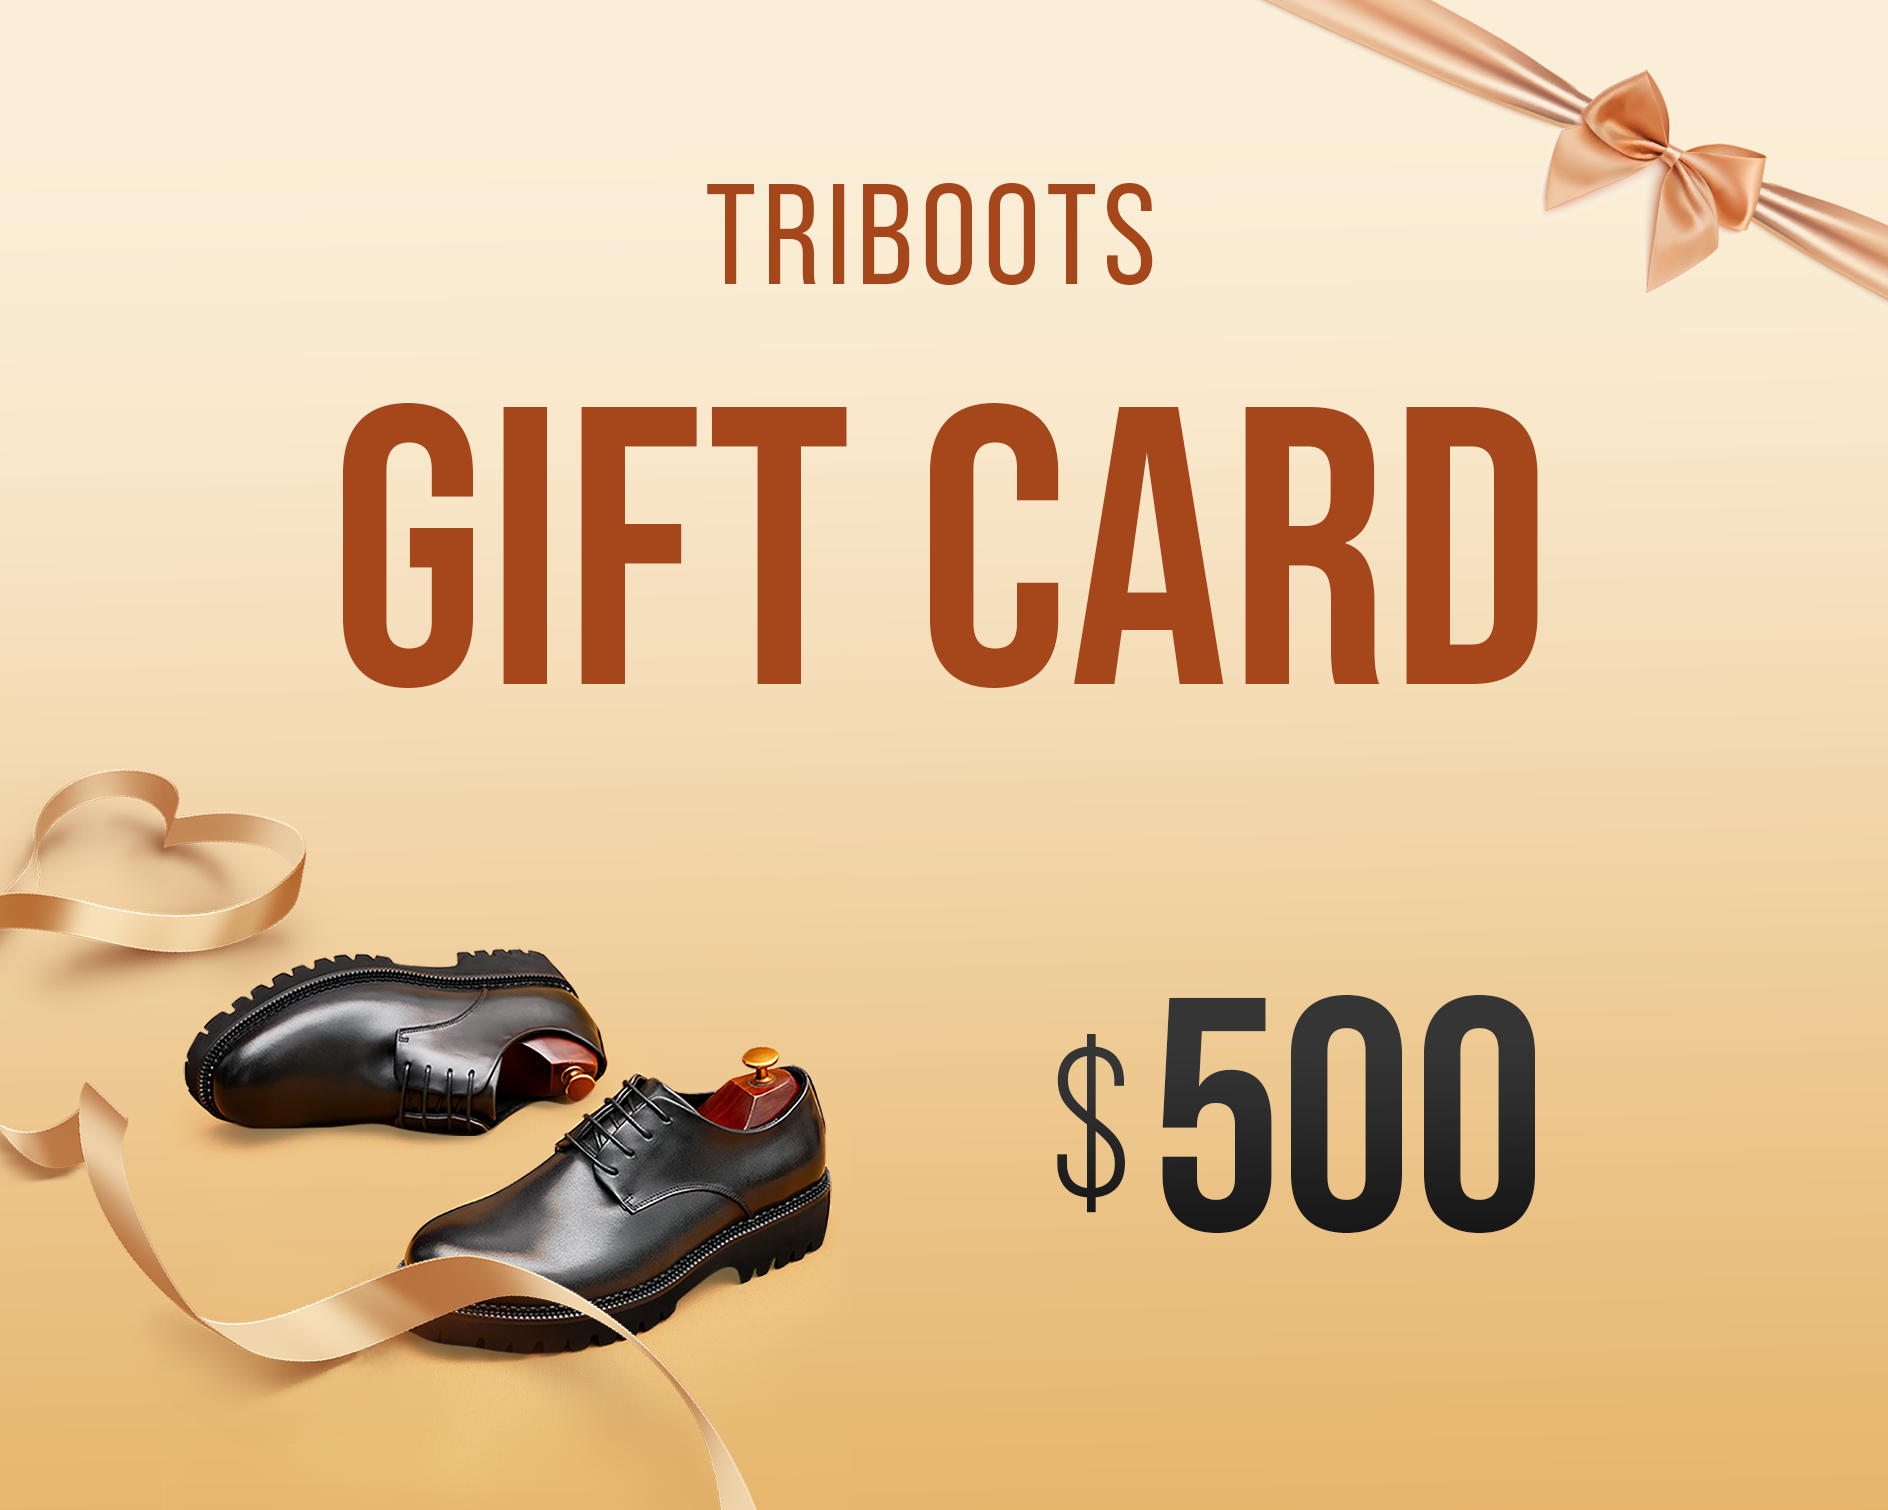 Assorted boots including fashion, vintage, and leather boots with Triboots Gift Card2